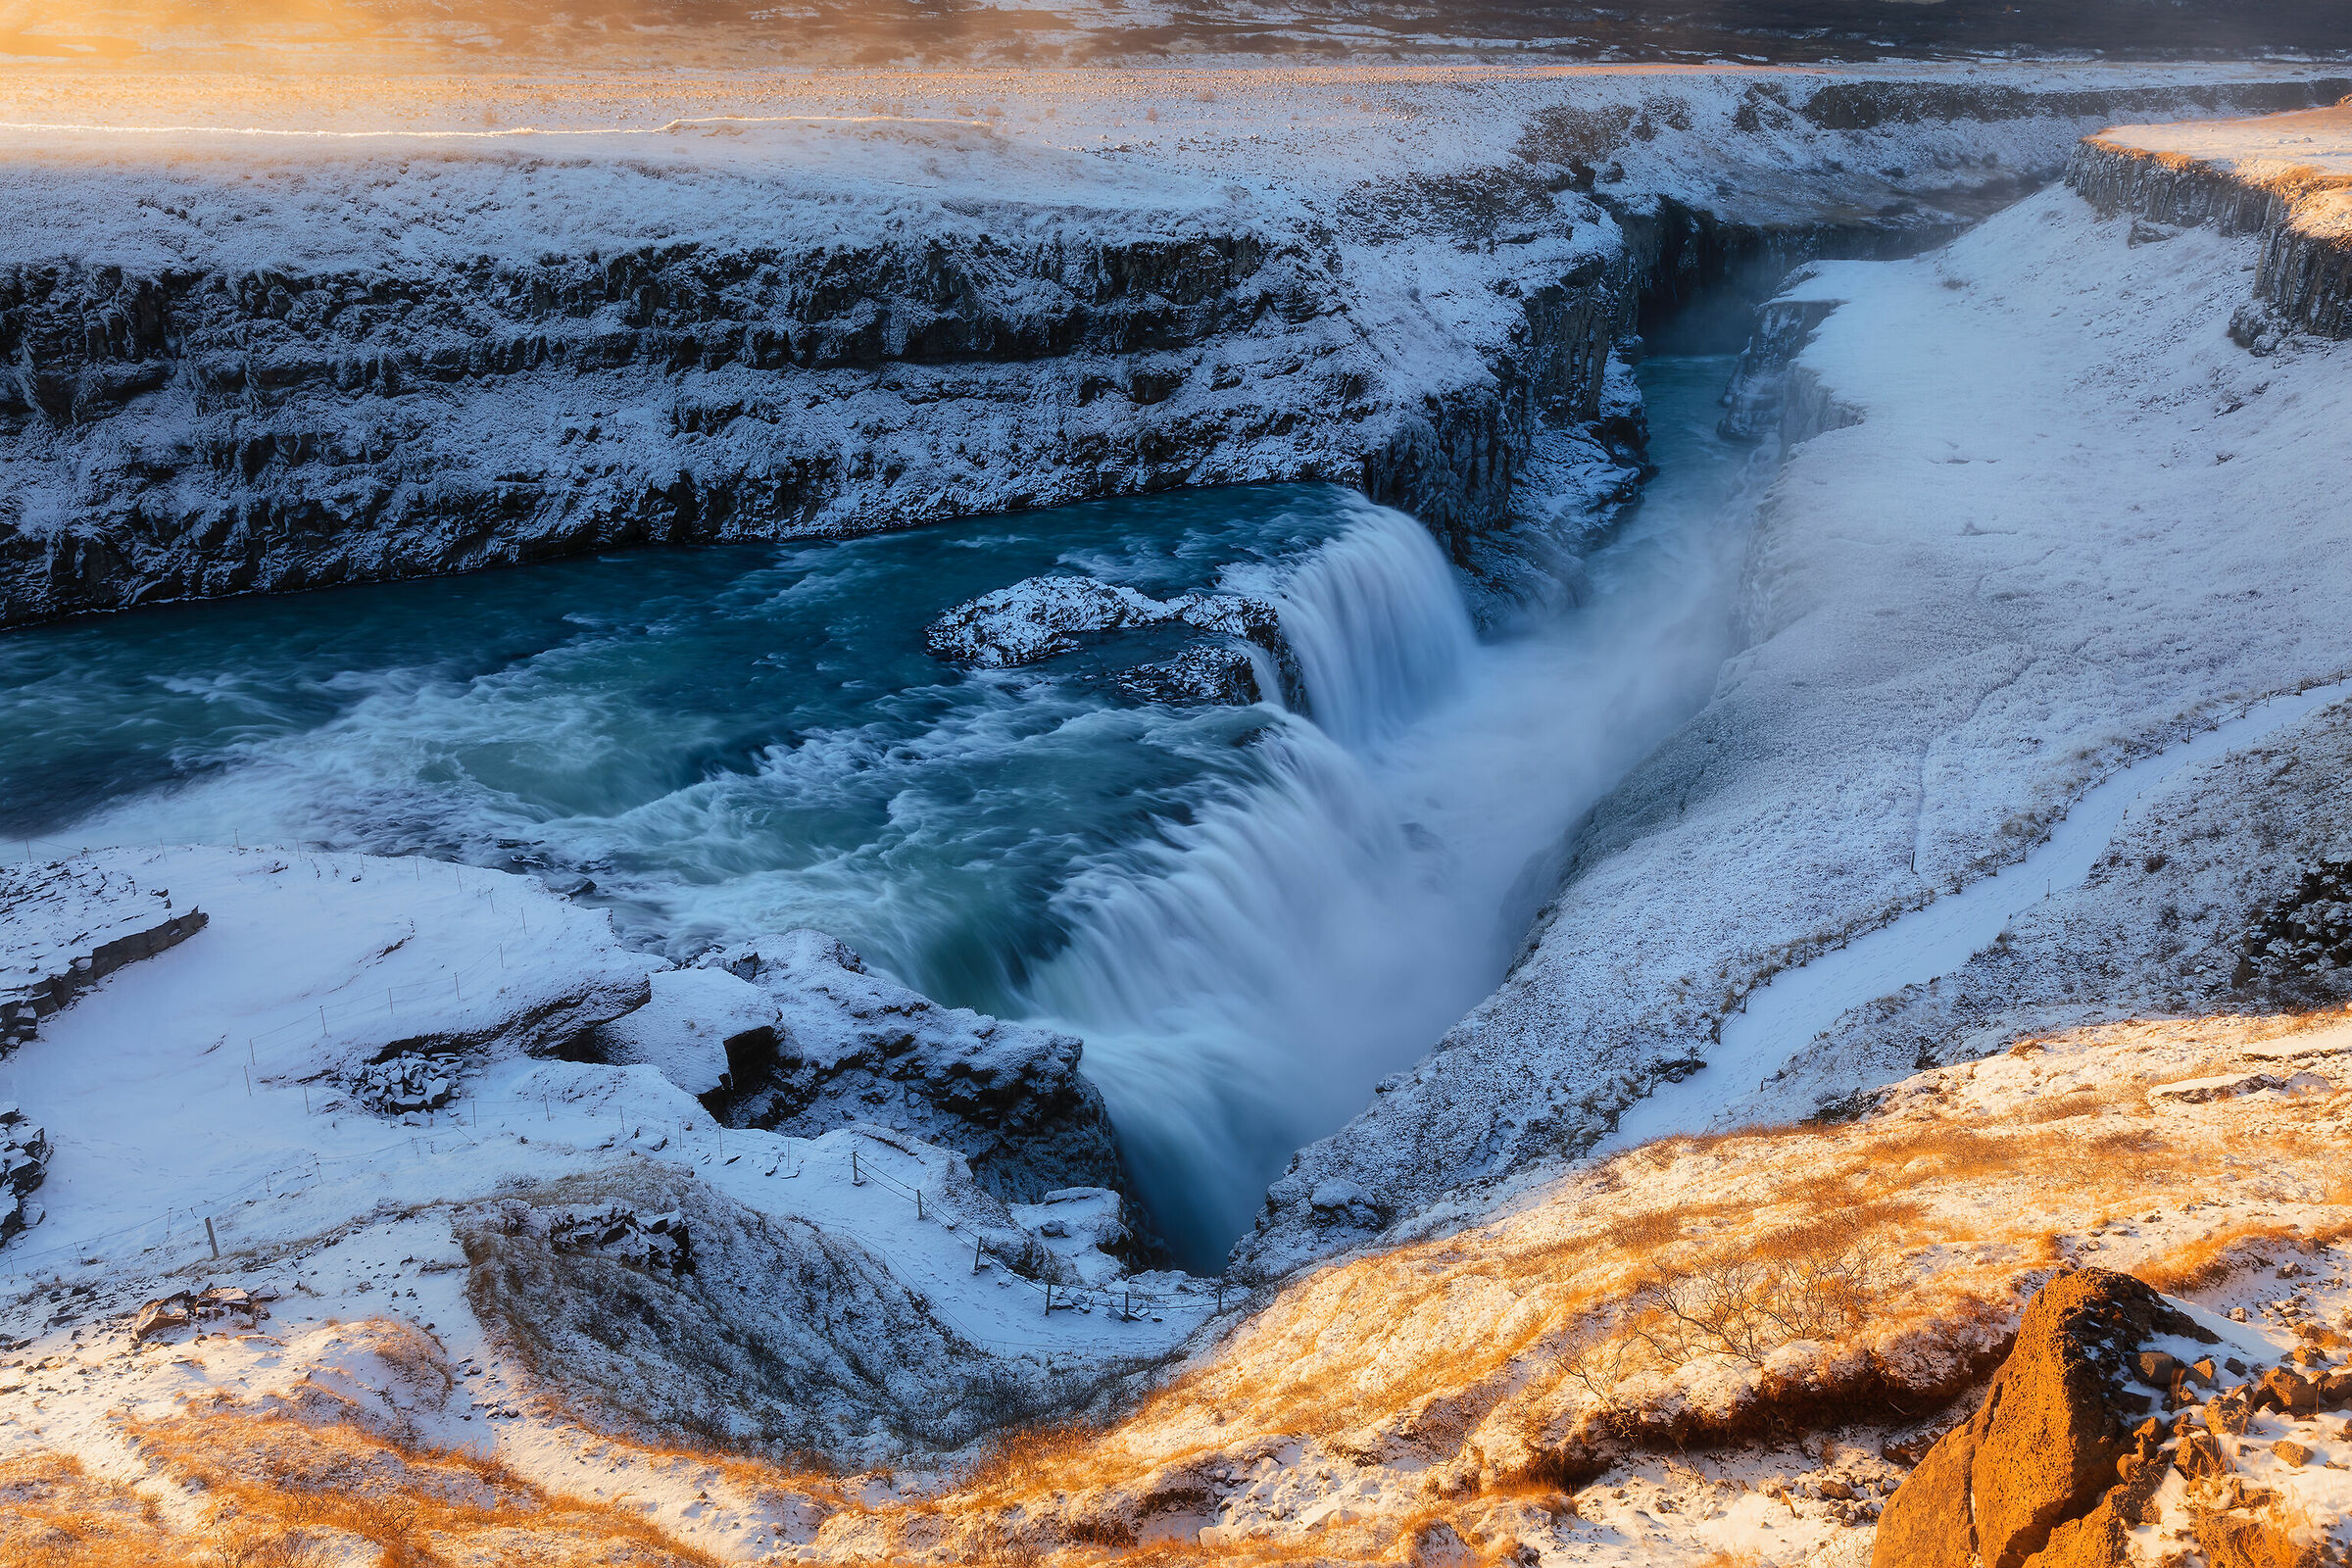 The first lights in Dettifoss, Iceland...